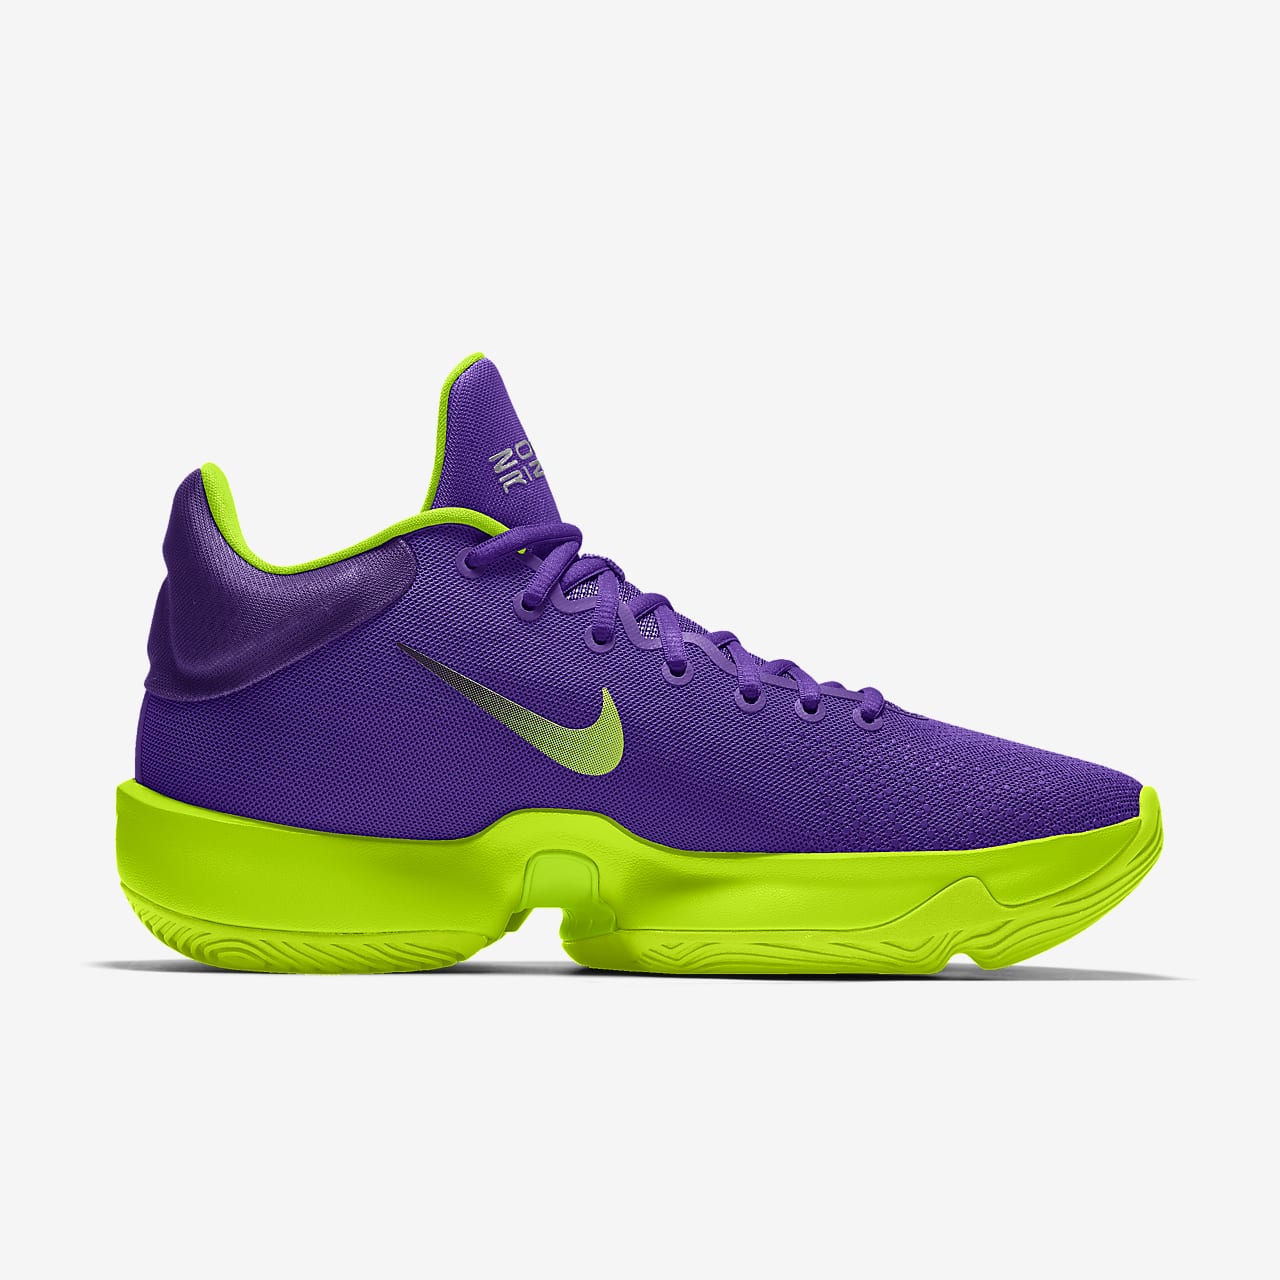 air zoom rize 2